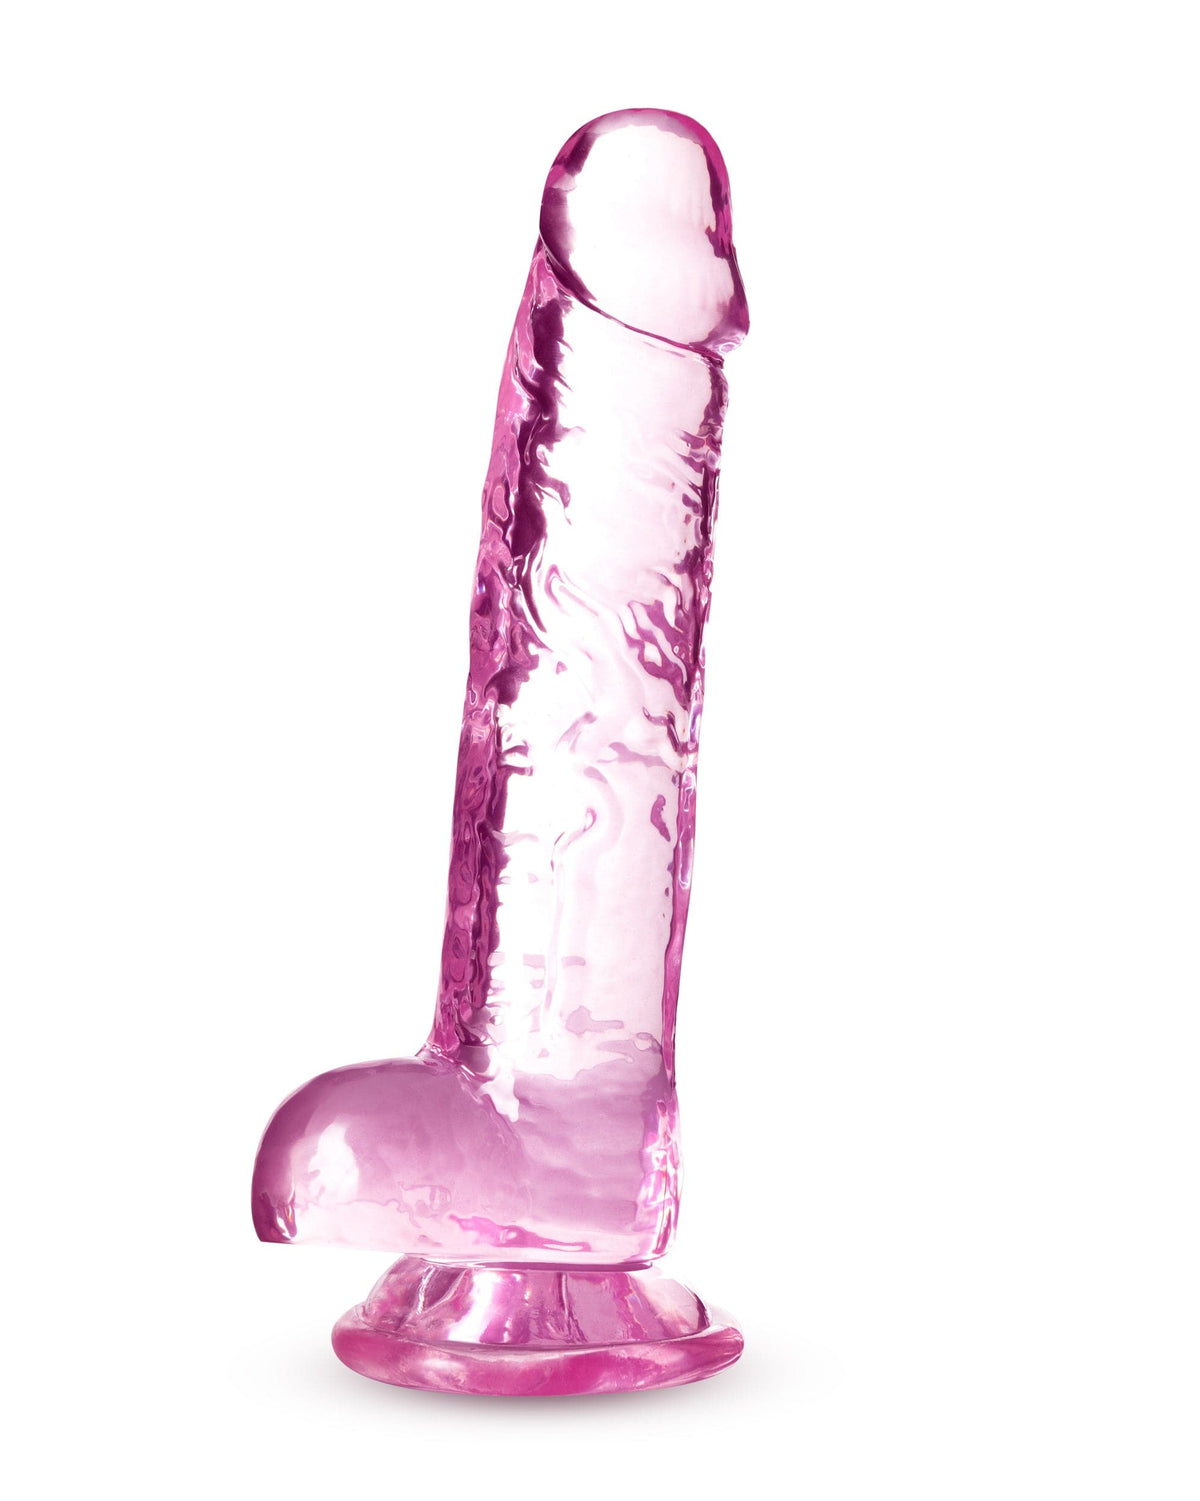 naturally yours 7 inch crystalline dildo rose